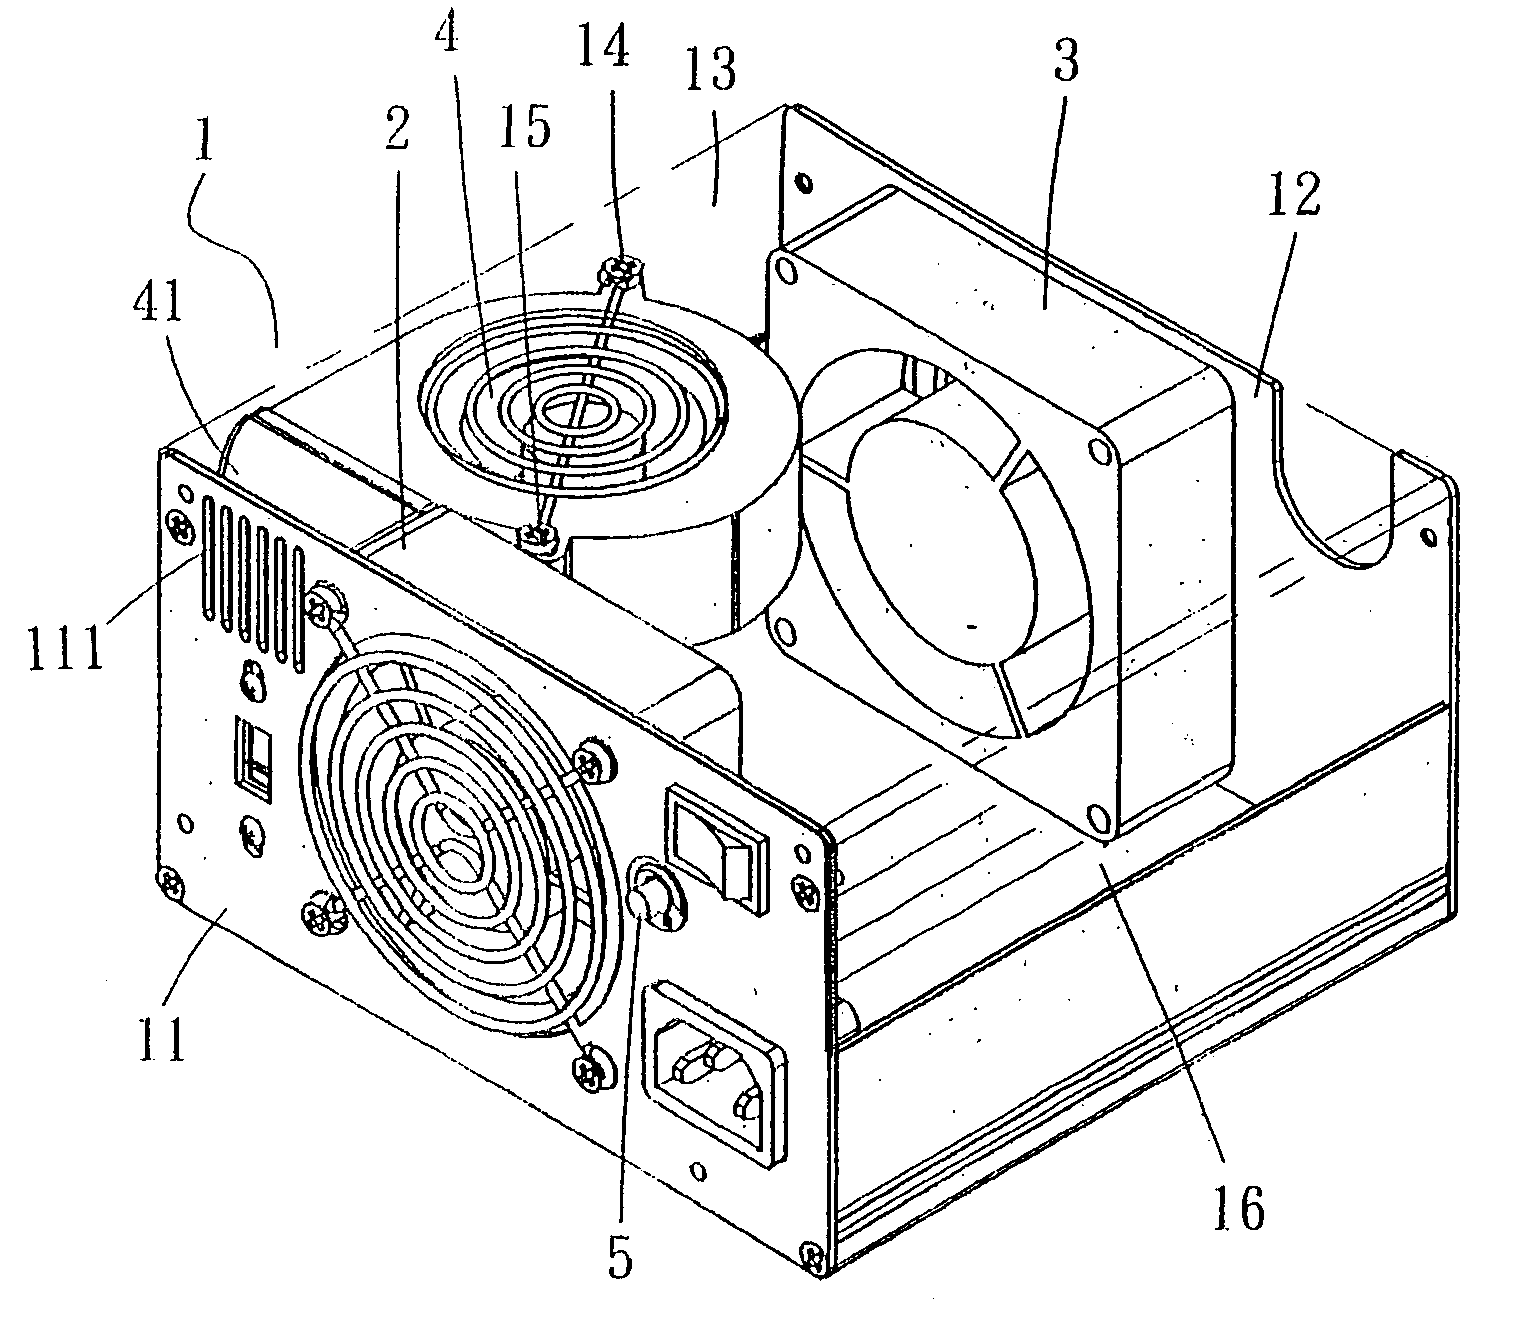 Power supply capable of dissipating heat from computer unit